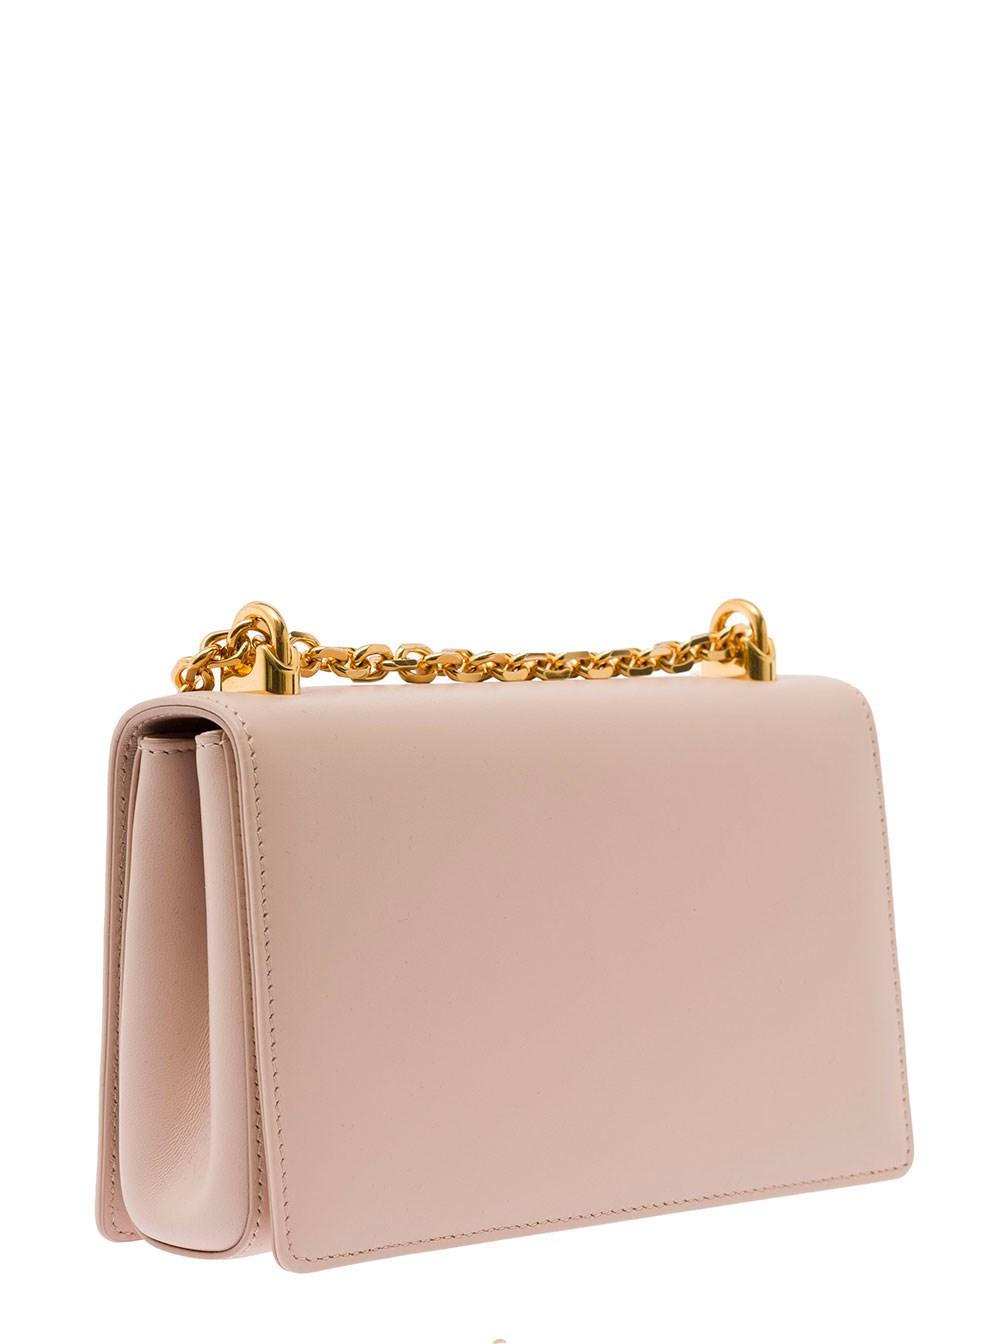 Dolce & Gabbana Pink Barocco Ccrossbody Bag With Chain Shoulder Strap And  Monogram Plate On The Front Dolce & Gabbana Woman in Natural | Lyst